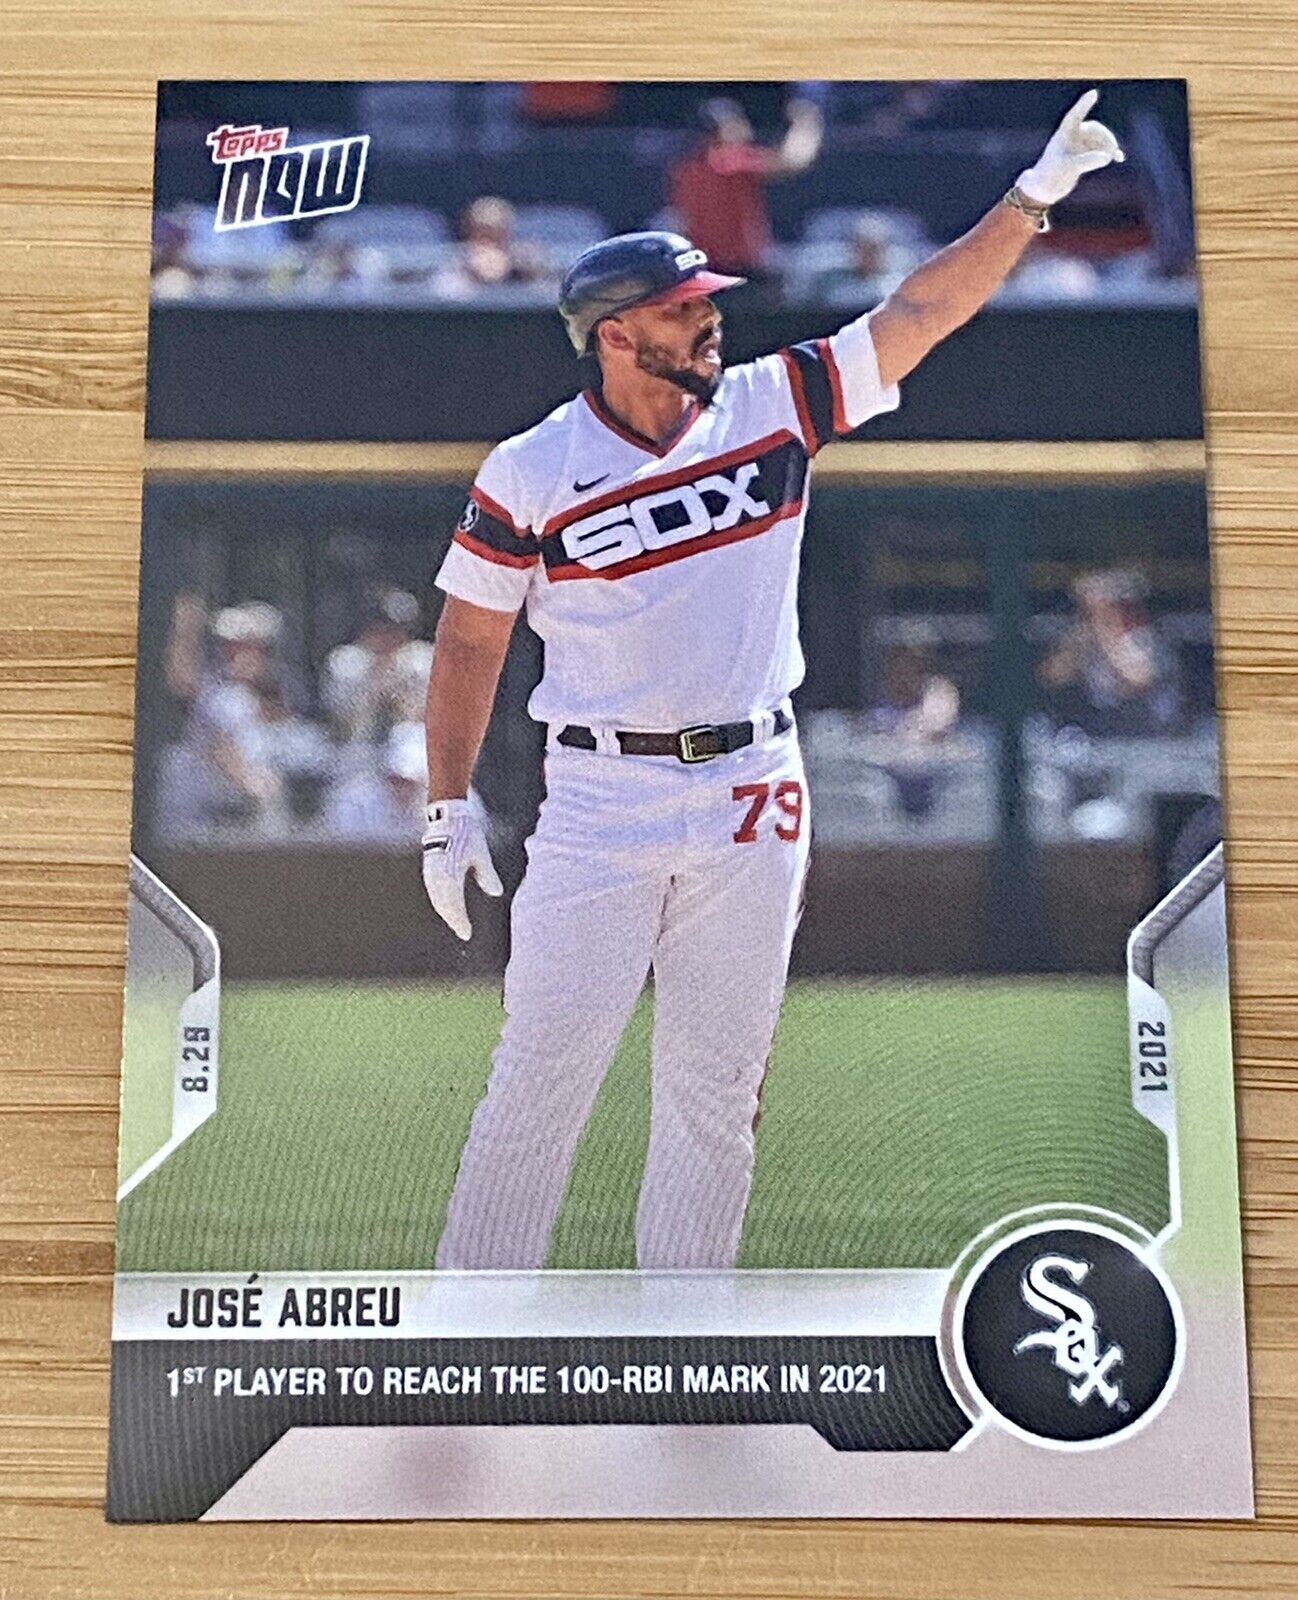 Jose Abreu, Chicago White Sox, 1st Player To Reach 100-RBI Mark In 2021, TN#730